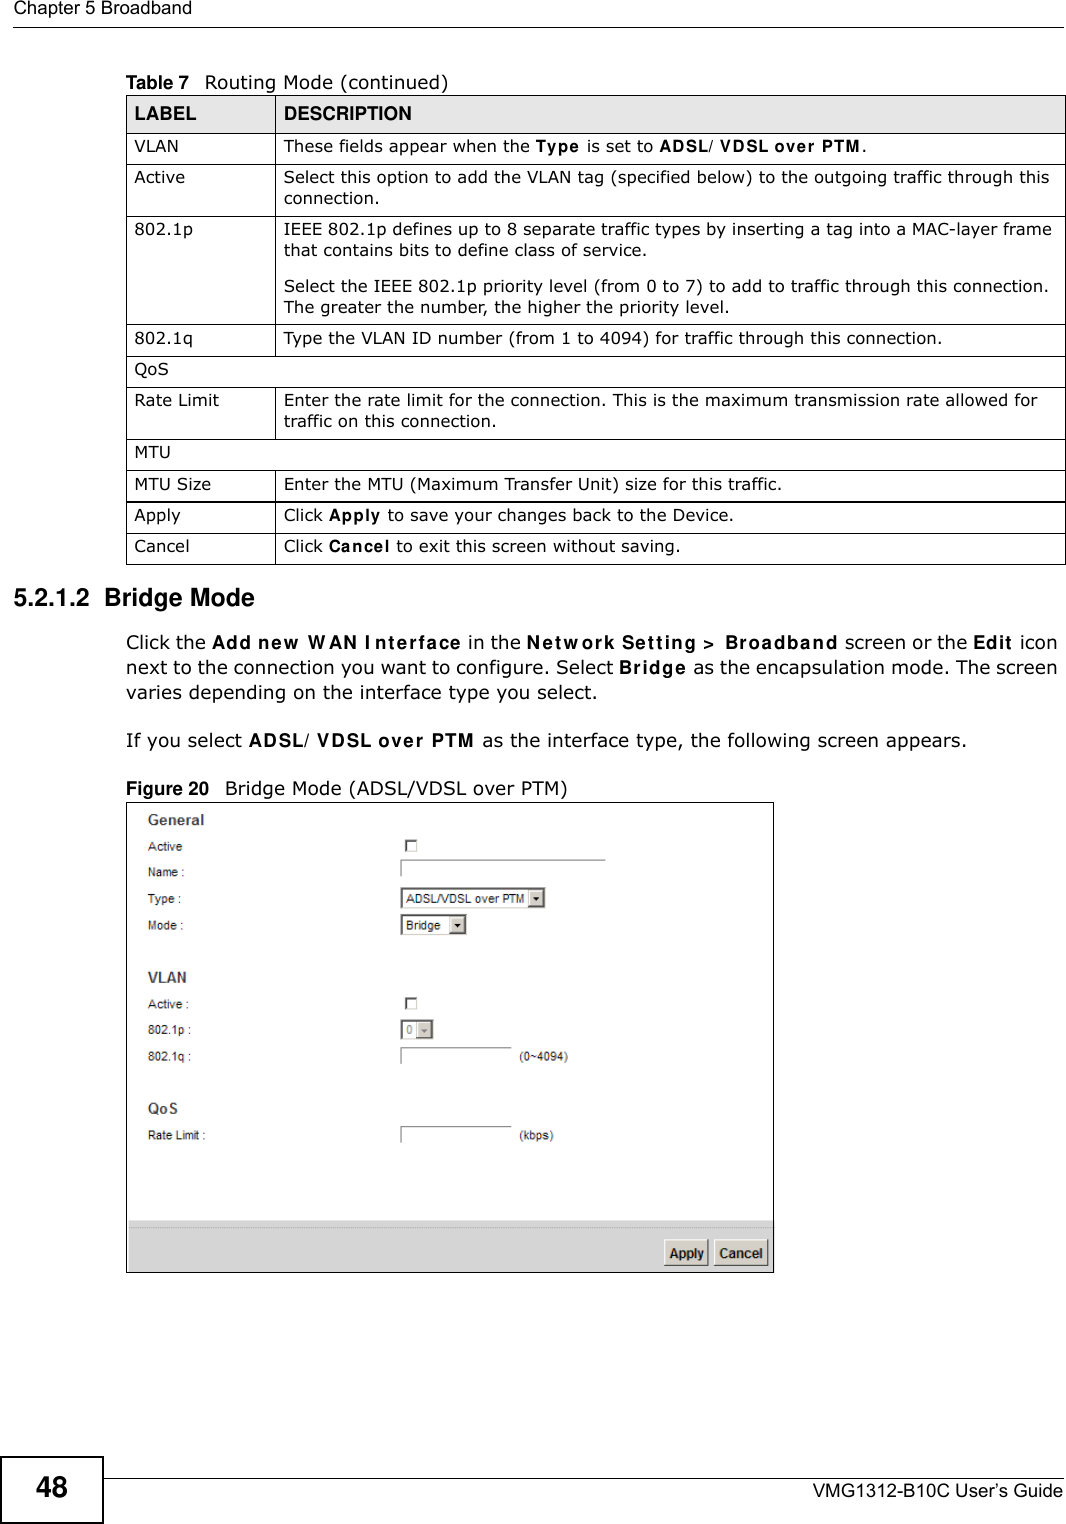 Chapter 5 BroadbandVMG1312-B10C User’s Guide485.2.1.2  Bridge ModeClick the Add new  W AN  I nt erface in the N e t w or k  Set t ing &gt;  Br oadba n d screen or the Edit  icon next to the connection you want to configure. Select Br idge as the encapsulation mode. The screen varies depending on the interface type you select. If you select AD SL/ VDSL ove r  PTM  as the interface type, the following screen appears.Figure 20   Bridge Mode (ADSL/VDSL over PTM)VLAN These fields appear when the Ty pe  is set to ADSL/ VD SL ov er PTM .Active Select this option to add the VLAN tag (specified below) to the outgoing traffic through this connection.802.1p  IEEE 802.1p defines up to 8 separate traffic types by inserting a tag into a MAC-layer frame that contains bits to define class of service. Select the IEEE 802.1p priority level (from 0 to 7) to add to traffic through this connection. The greater the number, the higher the priority level.802.1q Type the VLAN ID number (from 1 to 4094) for traffic through this connection.QoSRate Limit Enter the rate limit for the connection. This is the maximum transmission rate allowed for traffic on this connection.MTUMTU Size Enter the MTU (Maximum Transfer Unit) size for this traffic.Apply Click Apply to save your changes back to the Device.Cancel Click Cancel to exit this screen without saving.Table 7   Routing Mode (continued)LABEL DESCRIPTION